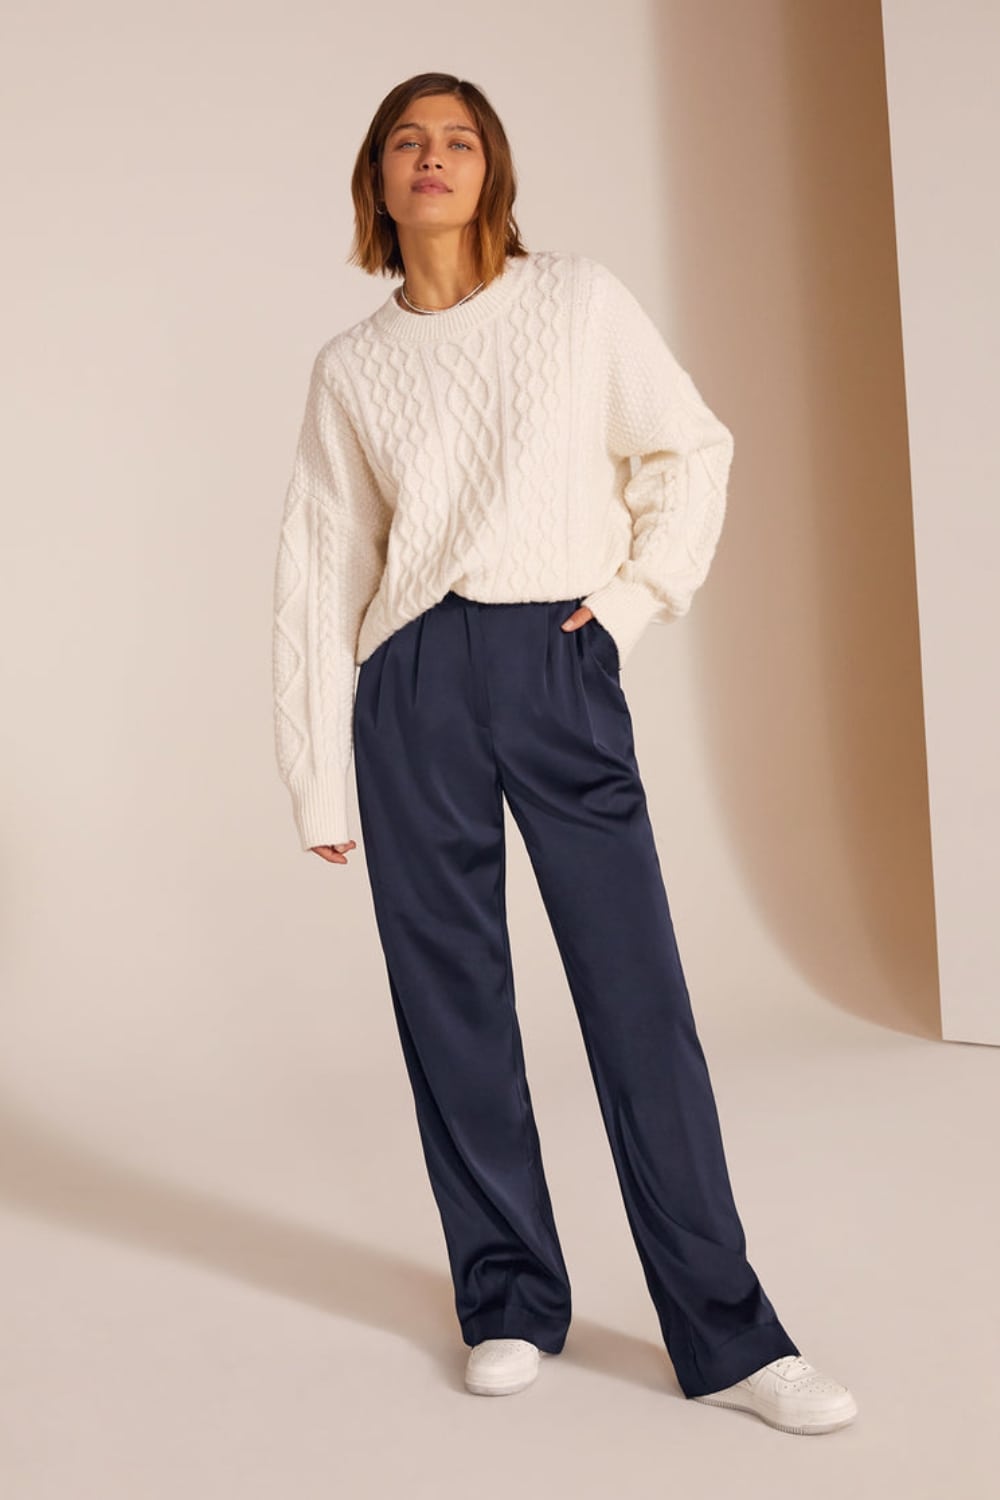 Satin pants outfit with cable knit sweater and white leather sneakers